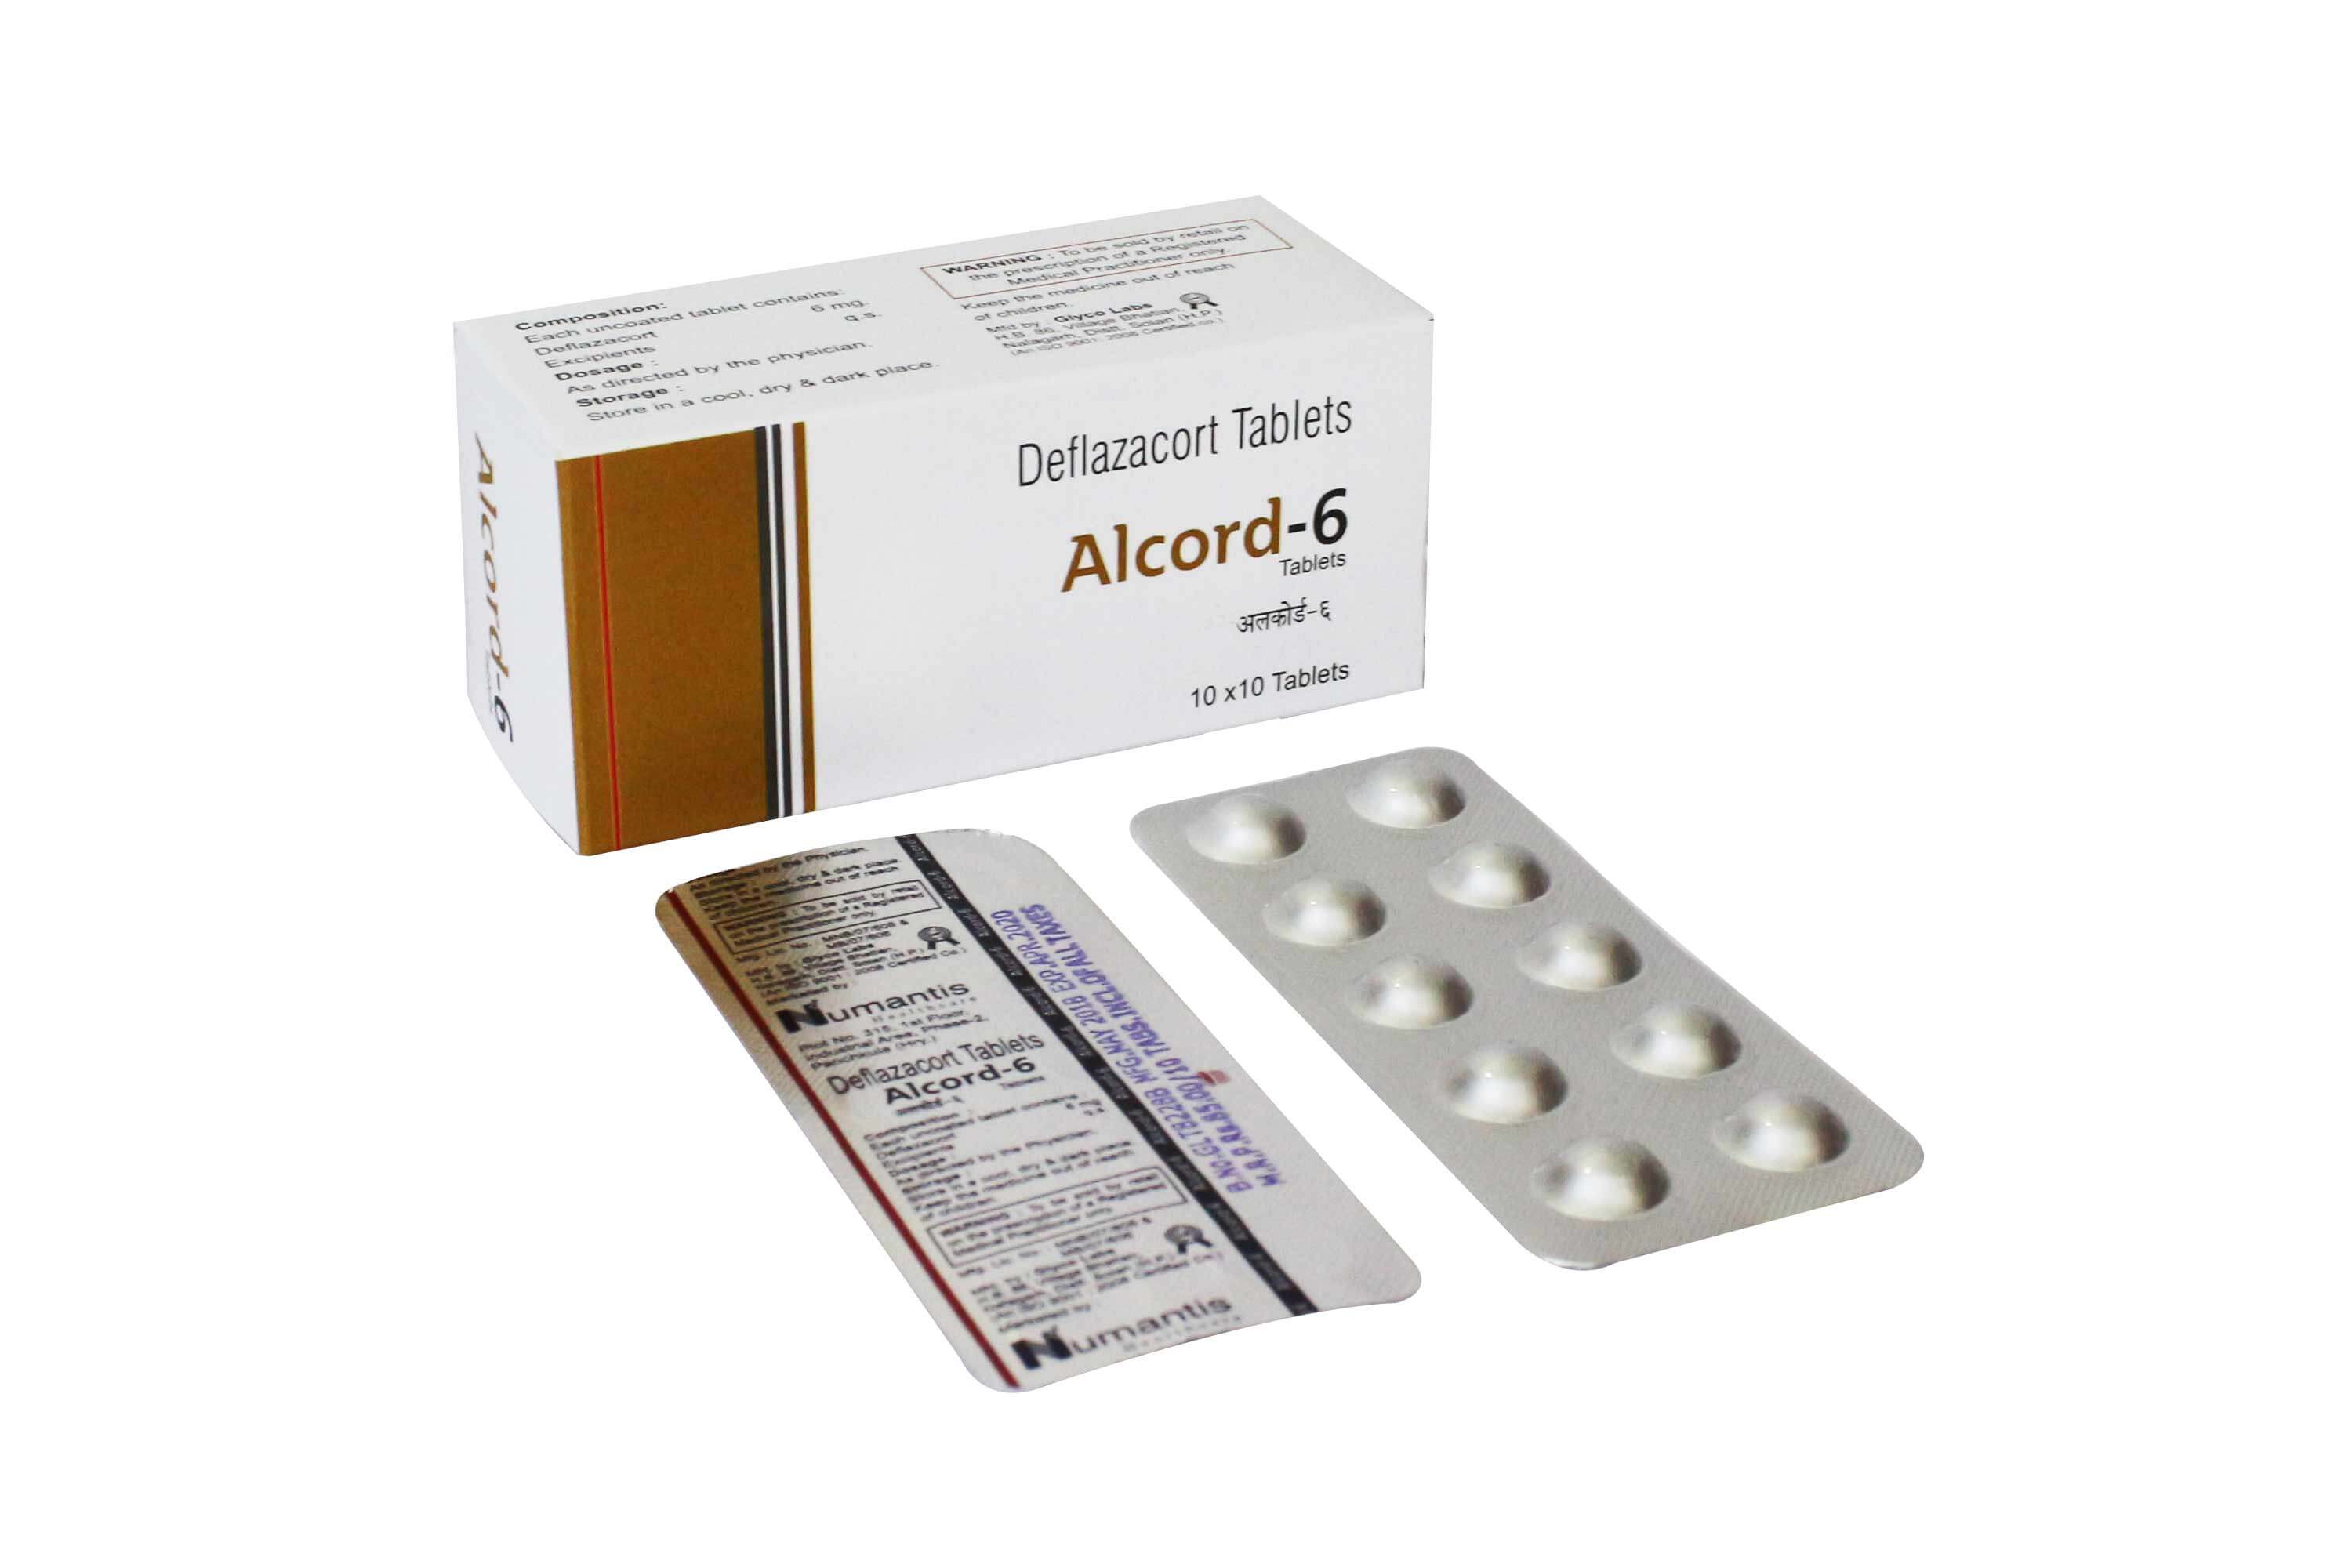 Product Name: Alcord 6, Compositions of Alcord 6 are Deflazacort Tablets - Numantis Healthcare